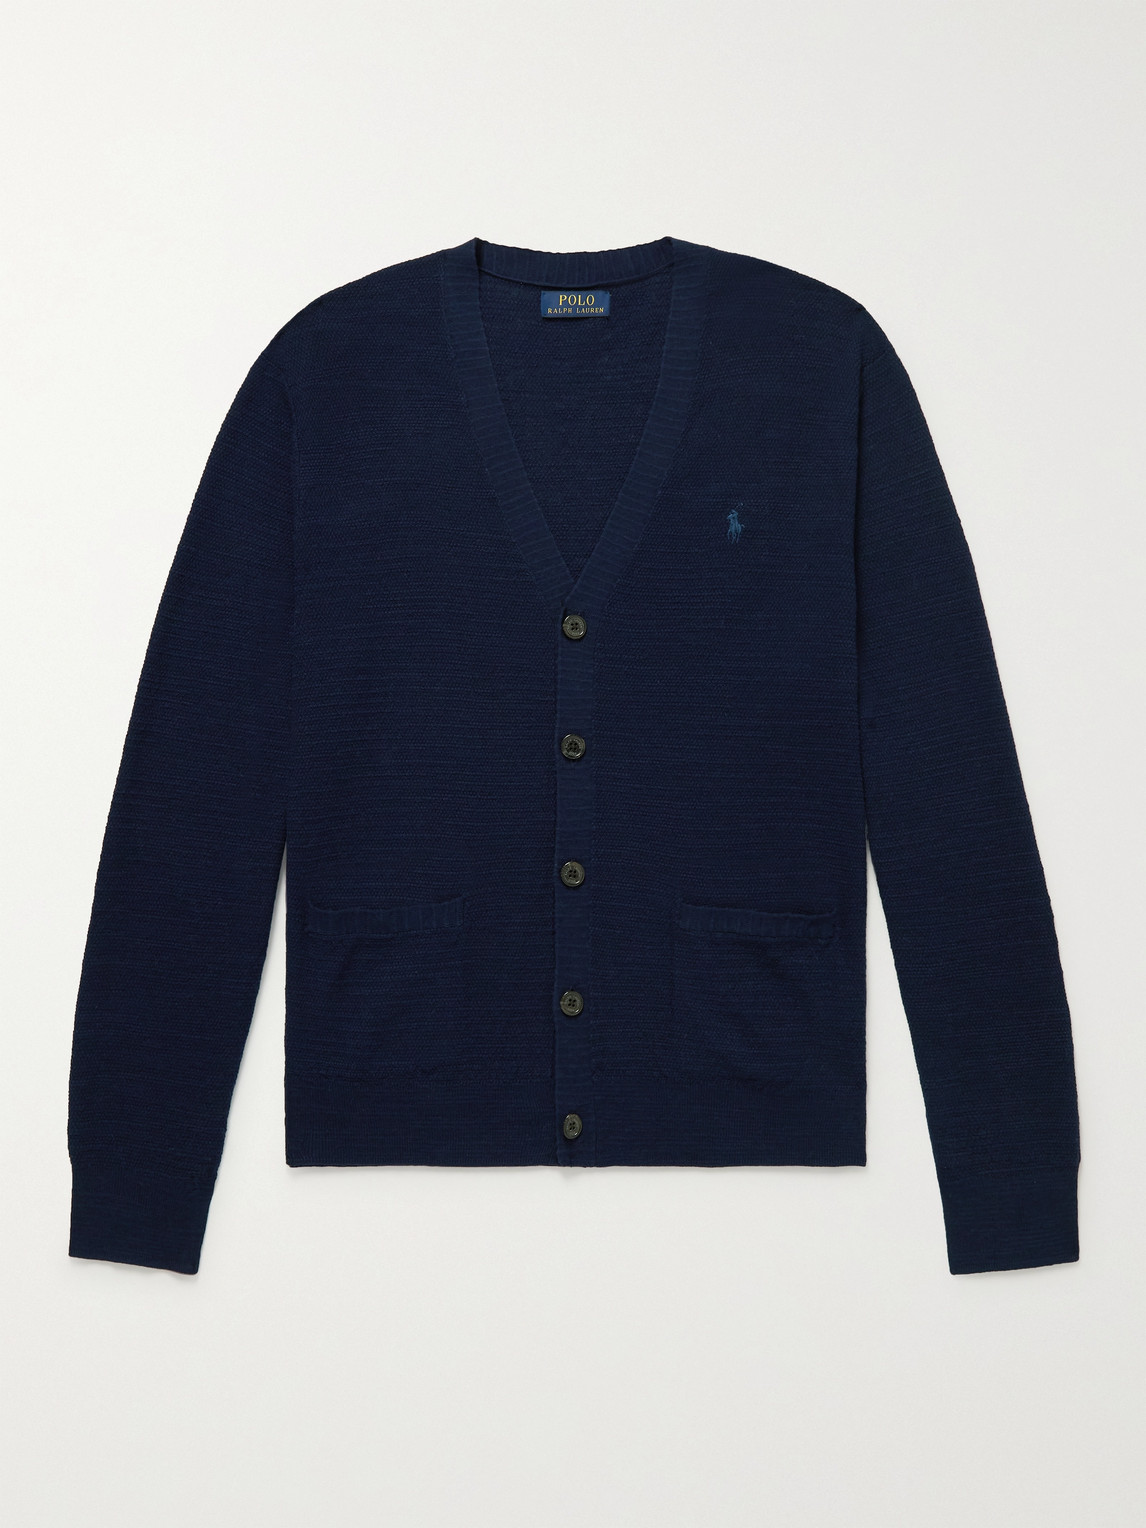 POLO RALPH LAUREN LOGO-EMBROIDERED WAFFLE-KNIT COTTON AND LINEN-BLEND CARDIGAN